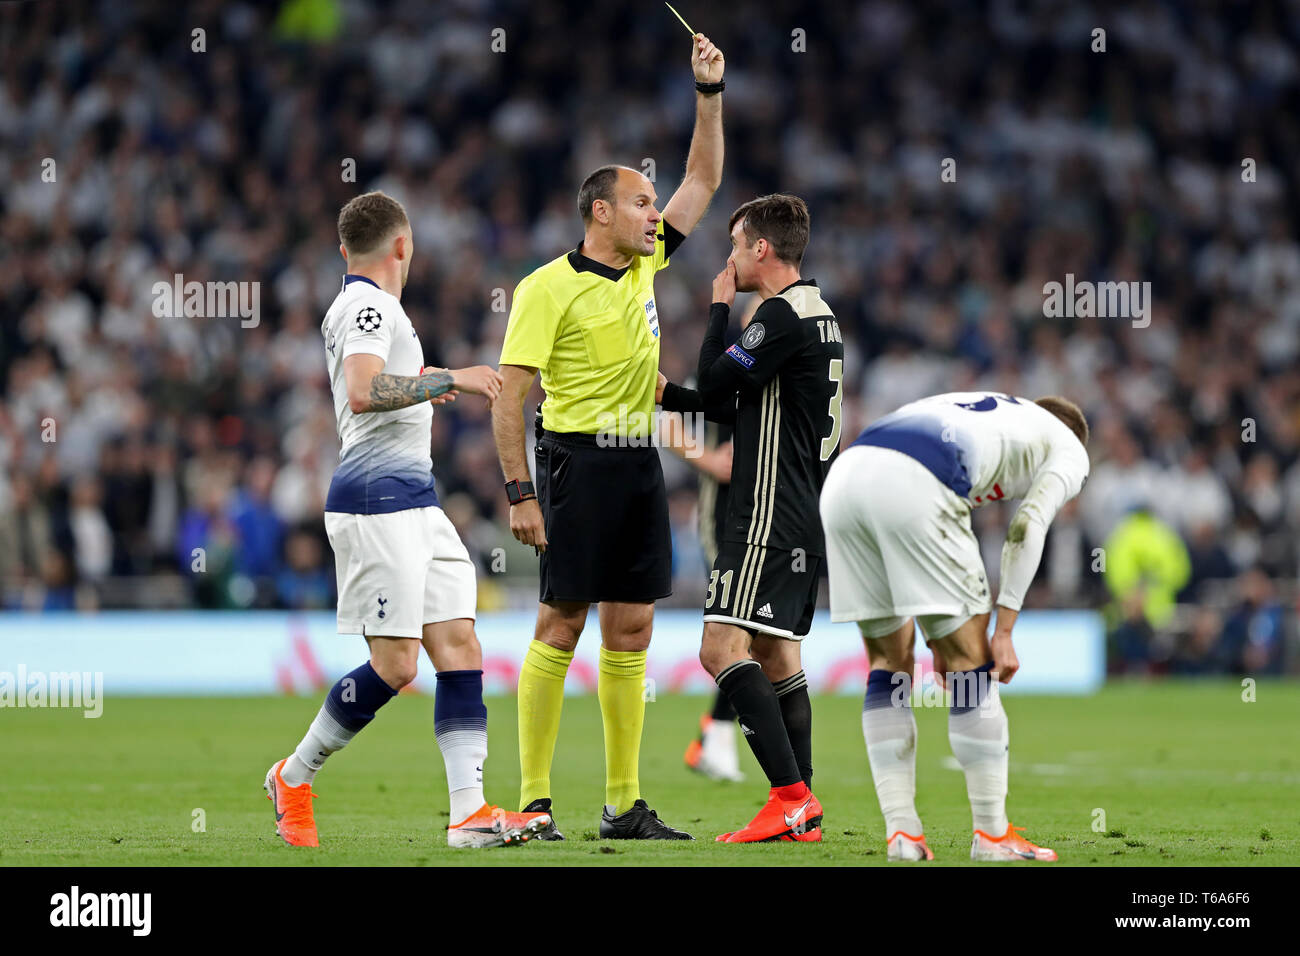 London, UK. 30th Apr 2019. Ajax defender Nicolas Tagliafico is shown the yellow card by Referee Antonio Mateu Lahoz during the UEFA Champions League match between Tottenham Hotspur and Ajax Amsterdam at White Hart Lane, London on Tuesday 30th April 2019. (Credit: Jon Bromley | MI News) Credit: MI News & Sport /Alamy Live News Stock Photo